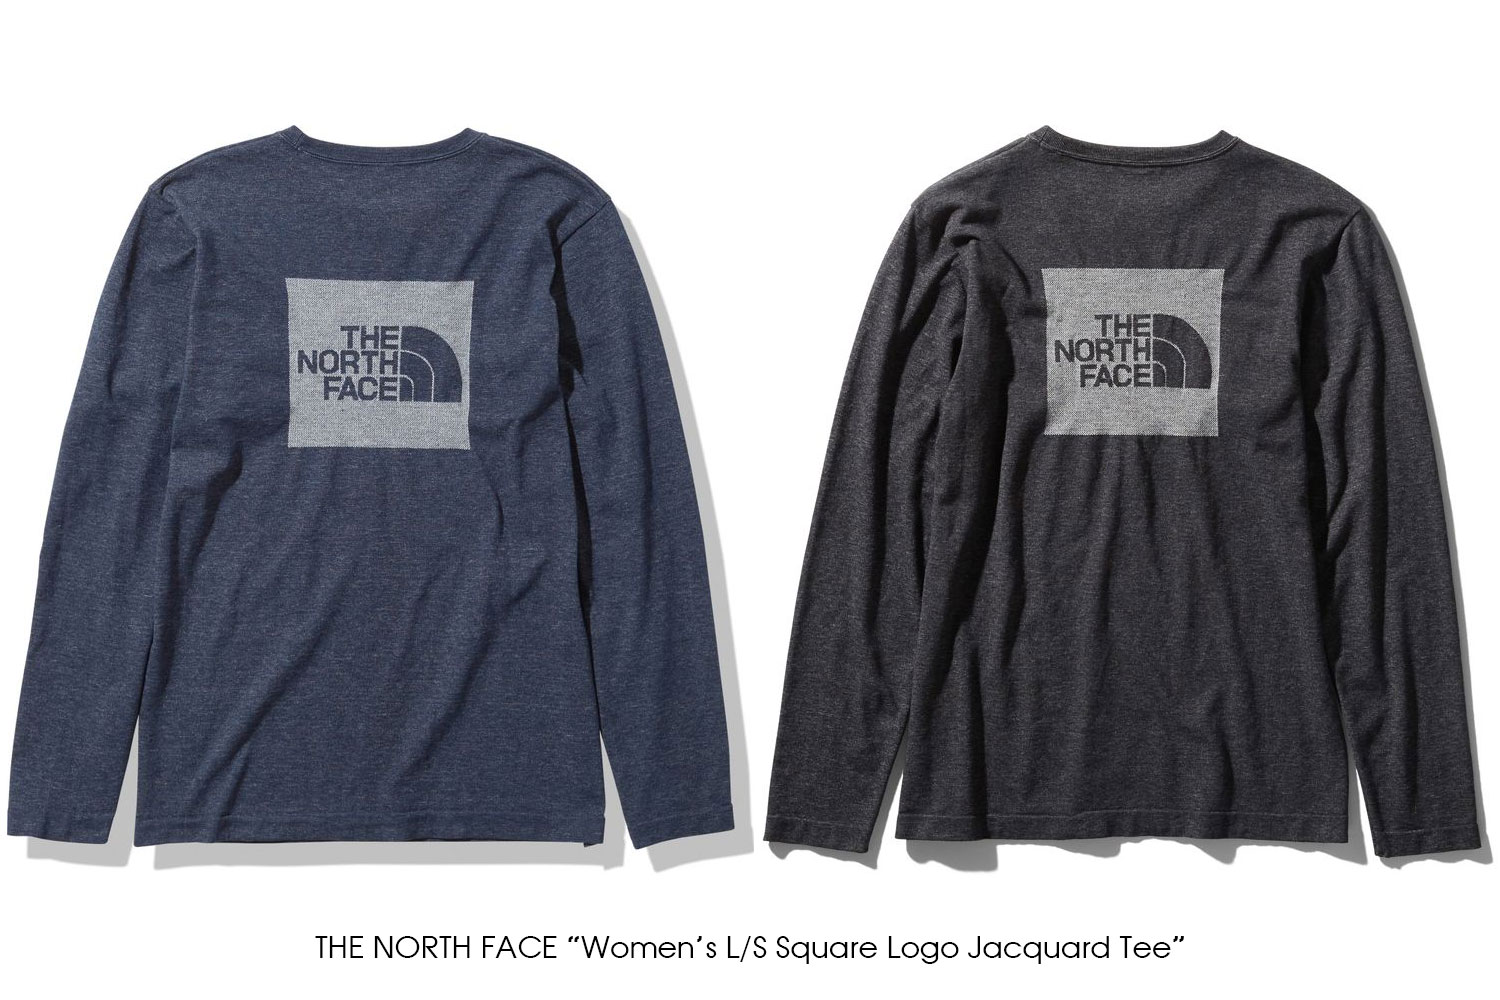 THE NORTH FACE "Women's L/S Square Logo Jacquard Tee"